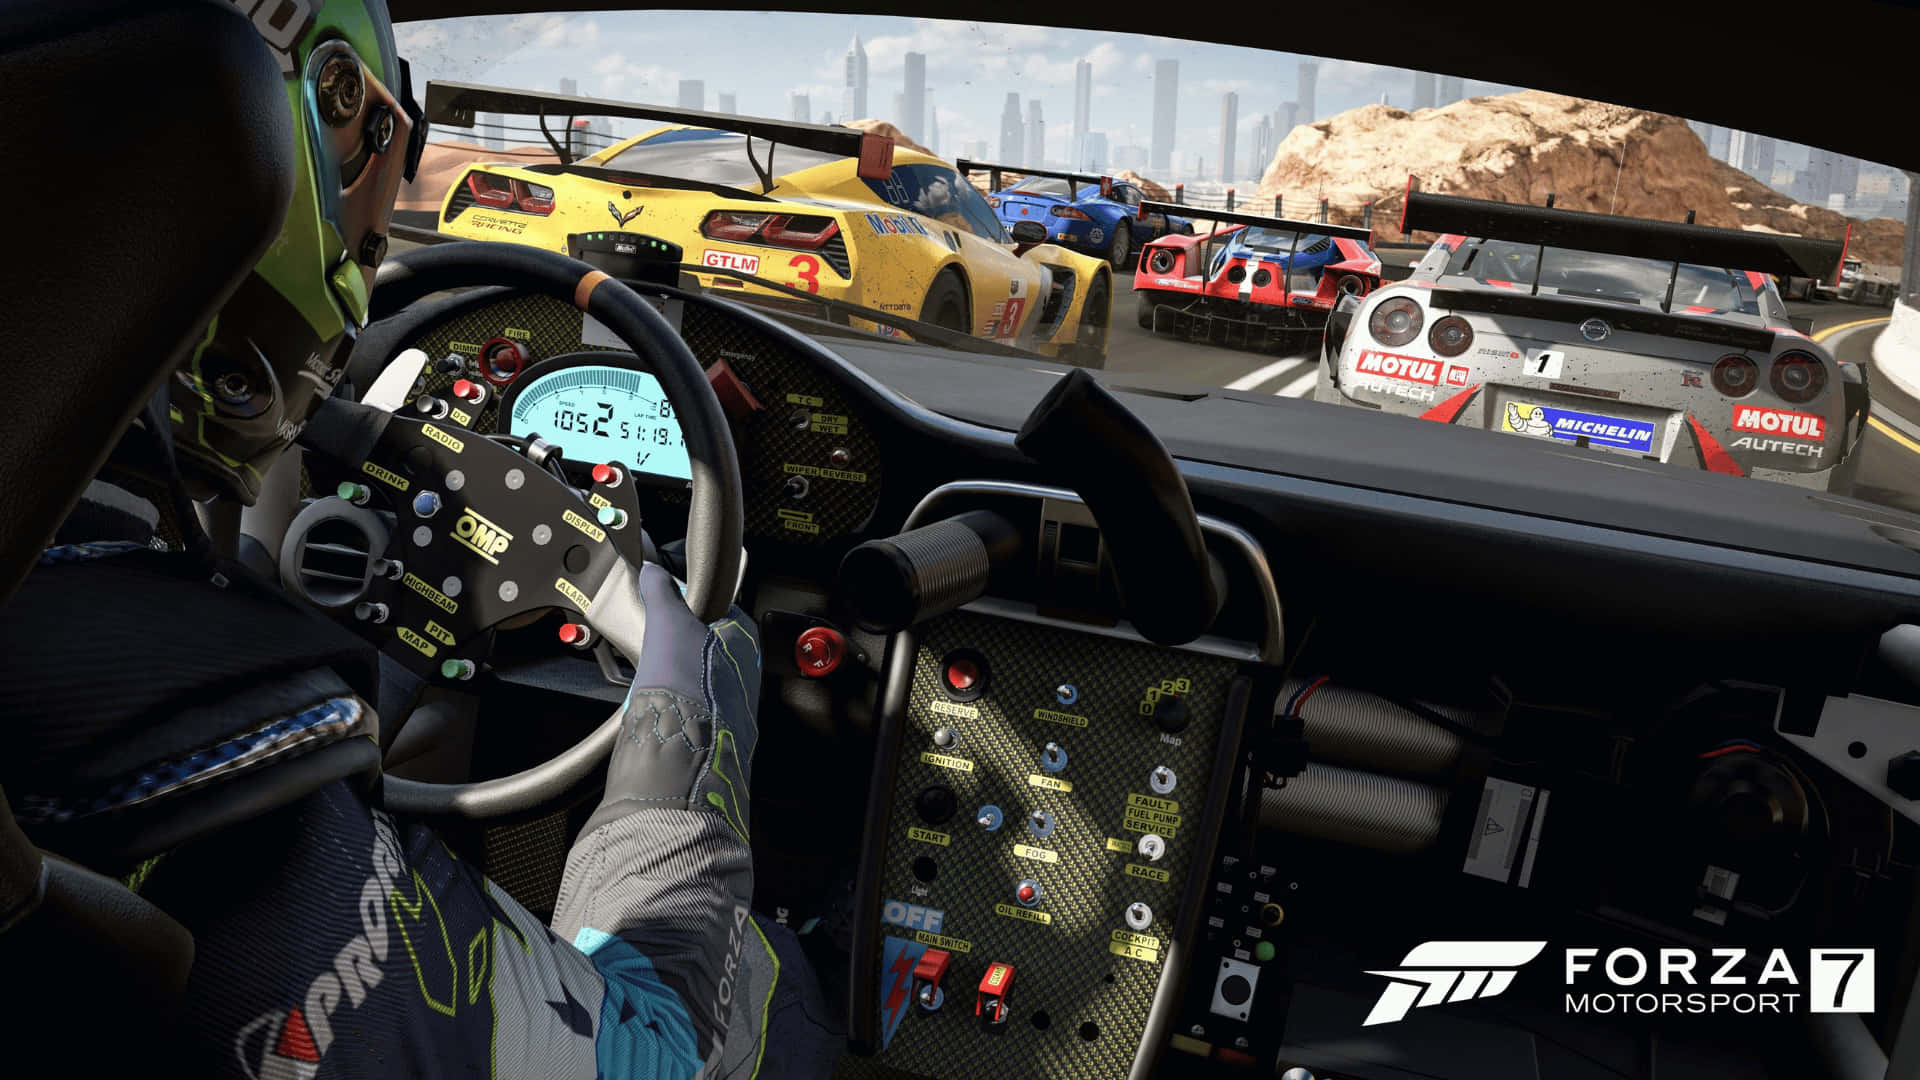 Race through exhilarating courses with incredible visual fidelity in Forza Motorsport 7.